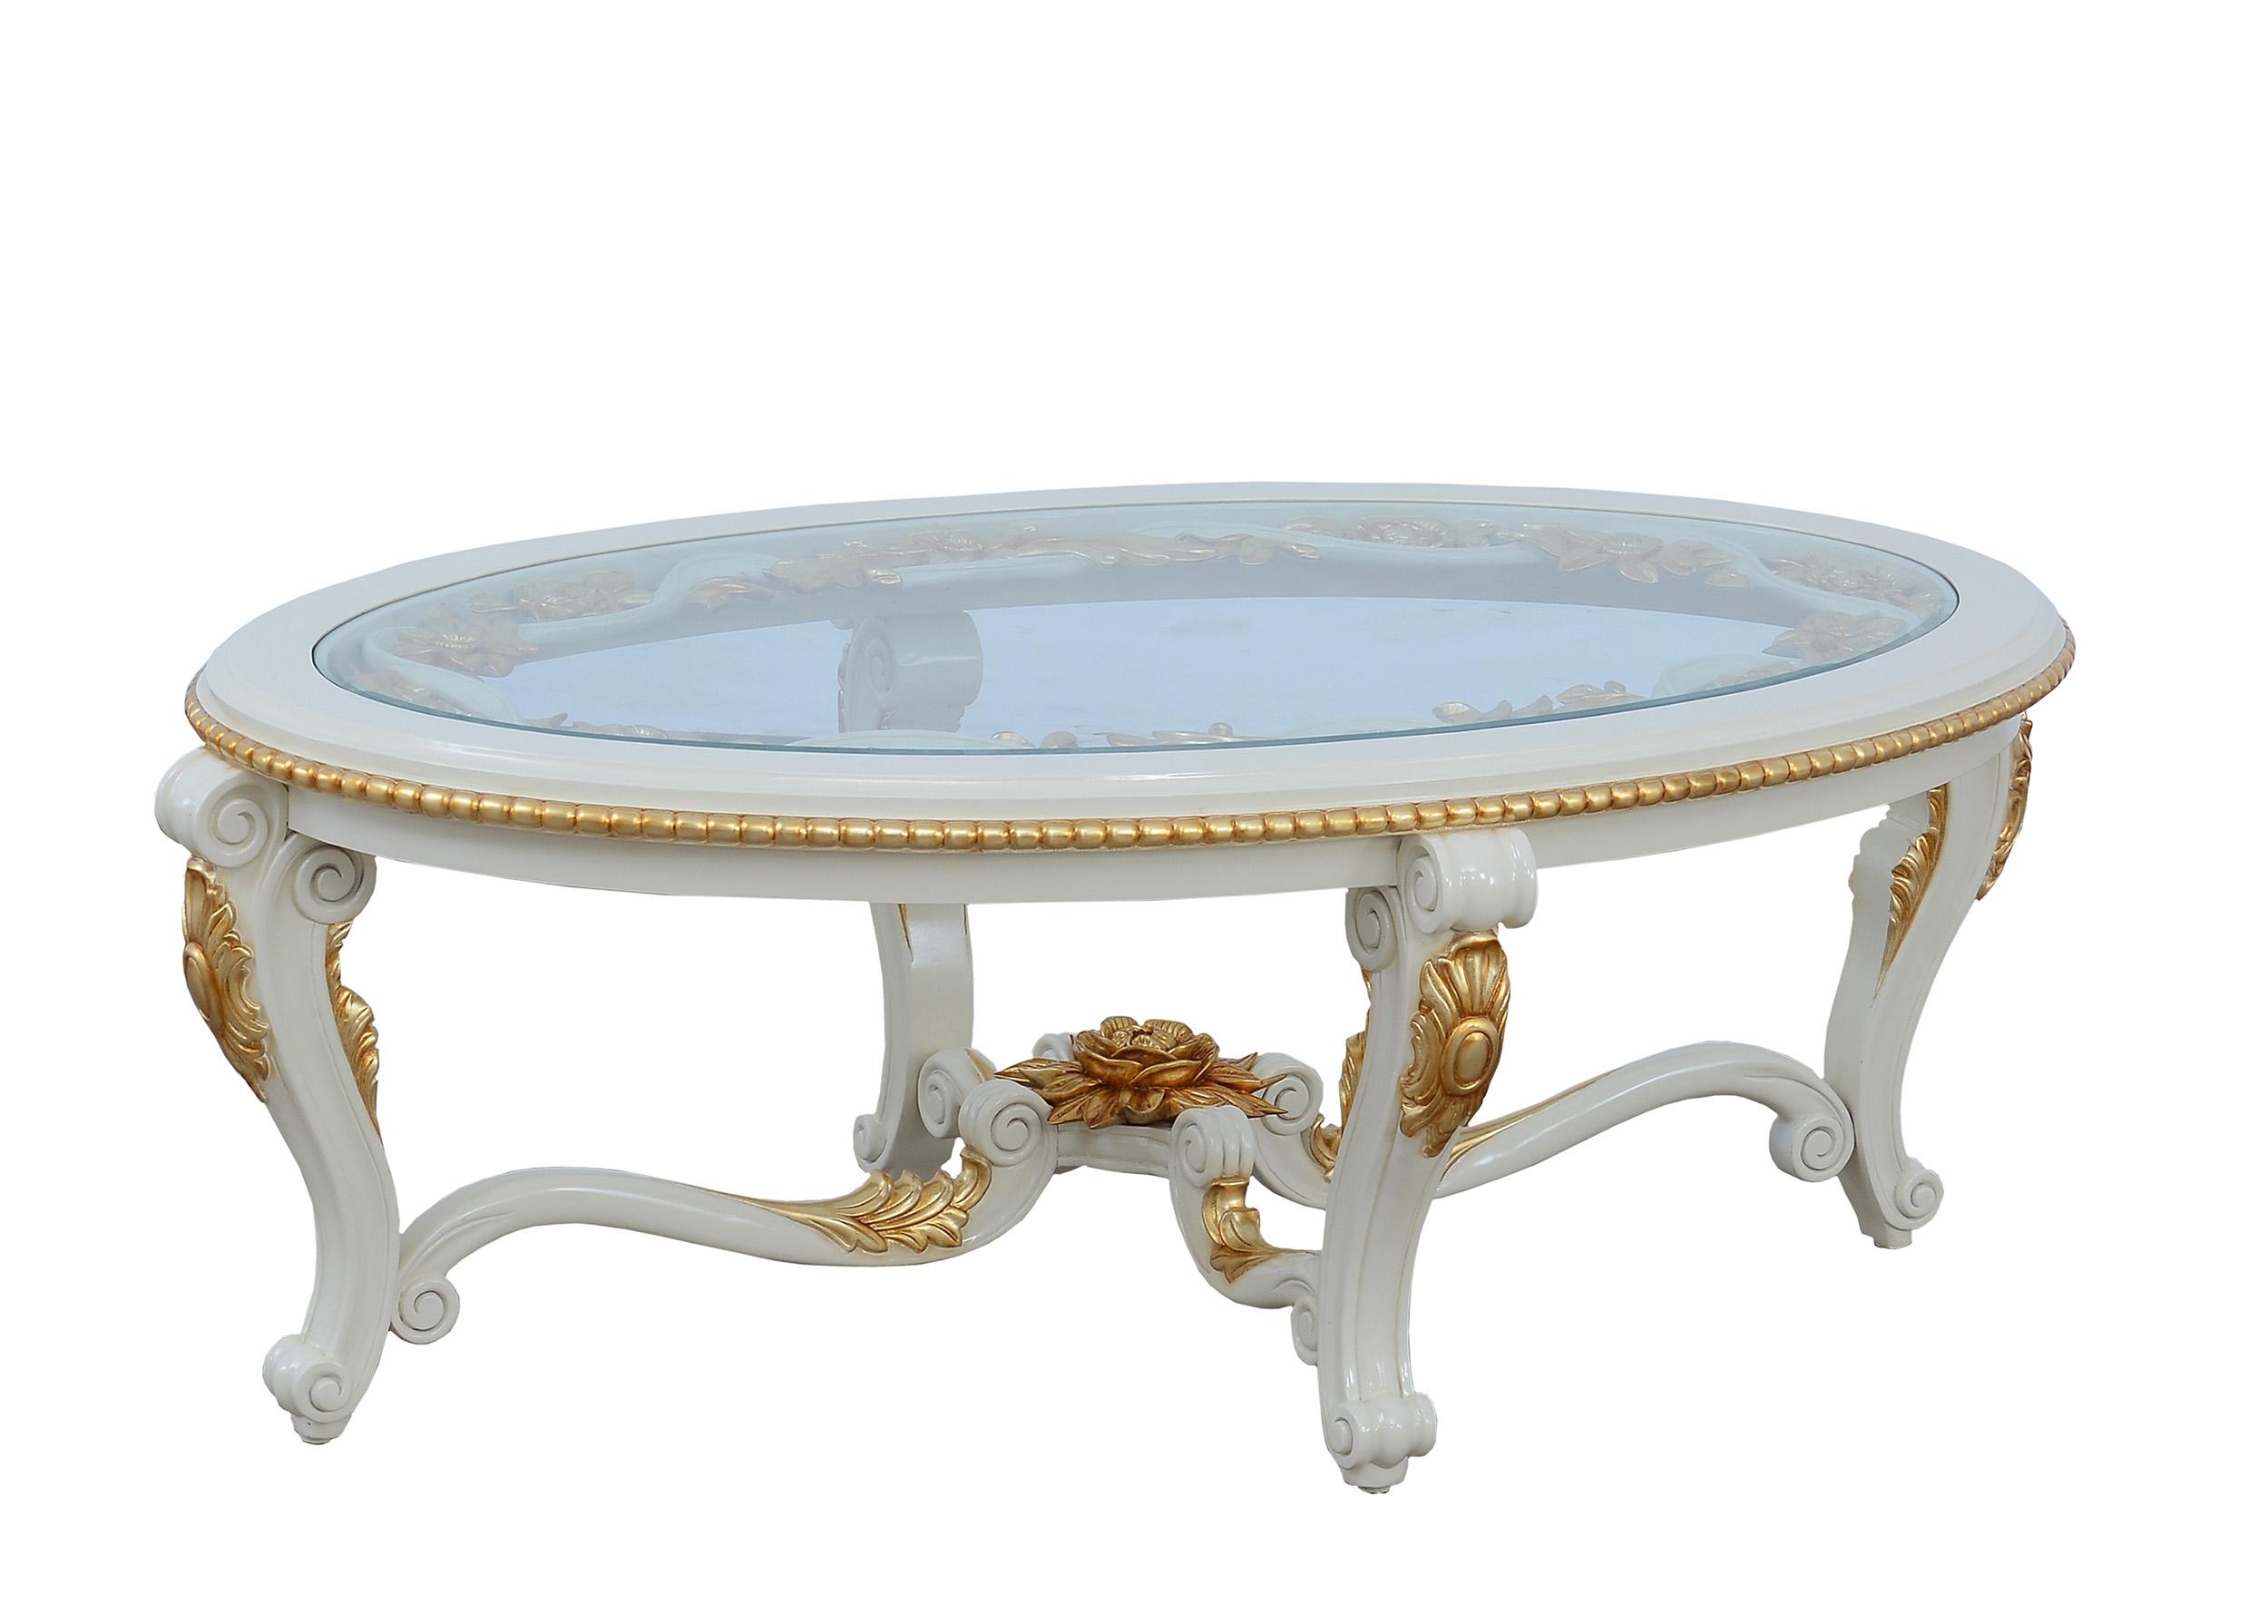 Classic, Traditional Coffee Table BELLAGIO 30017-CT in Antique, Gold, Beige 